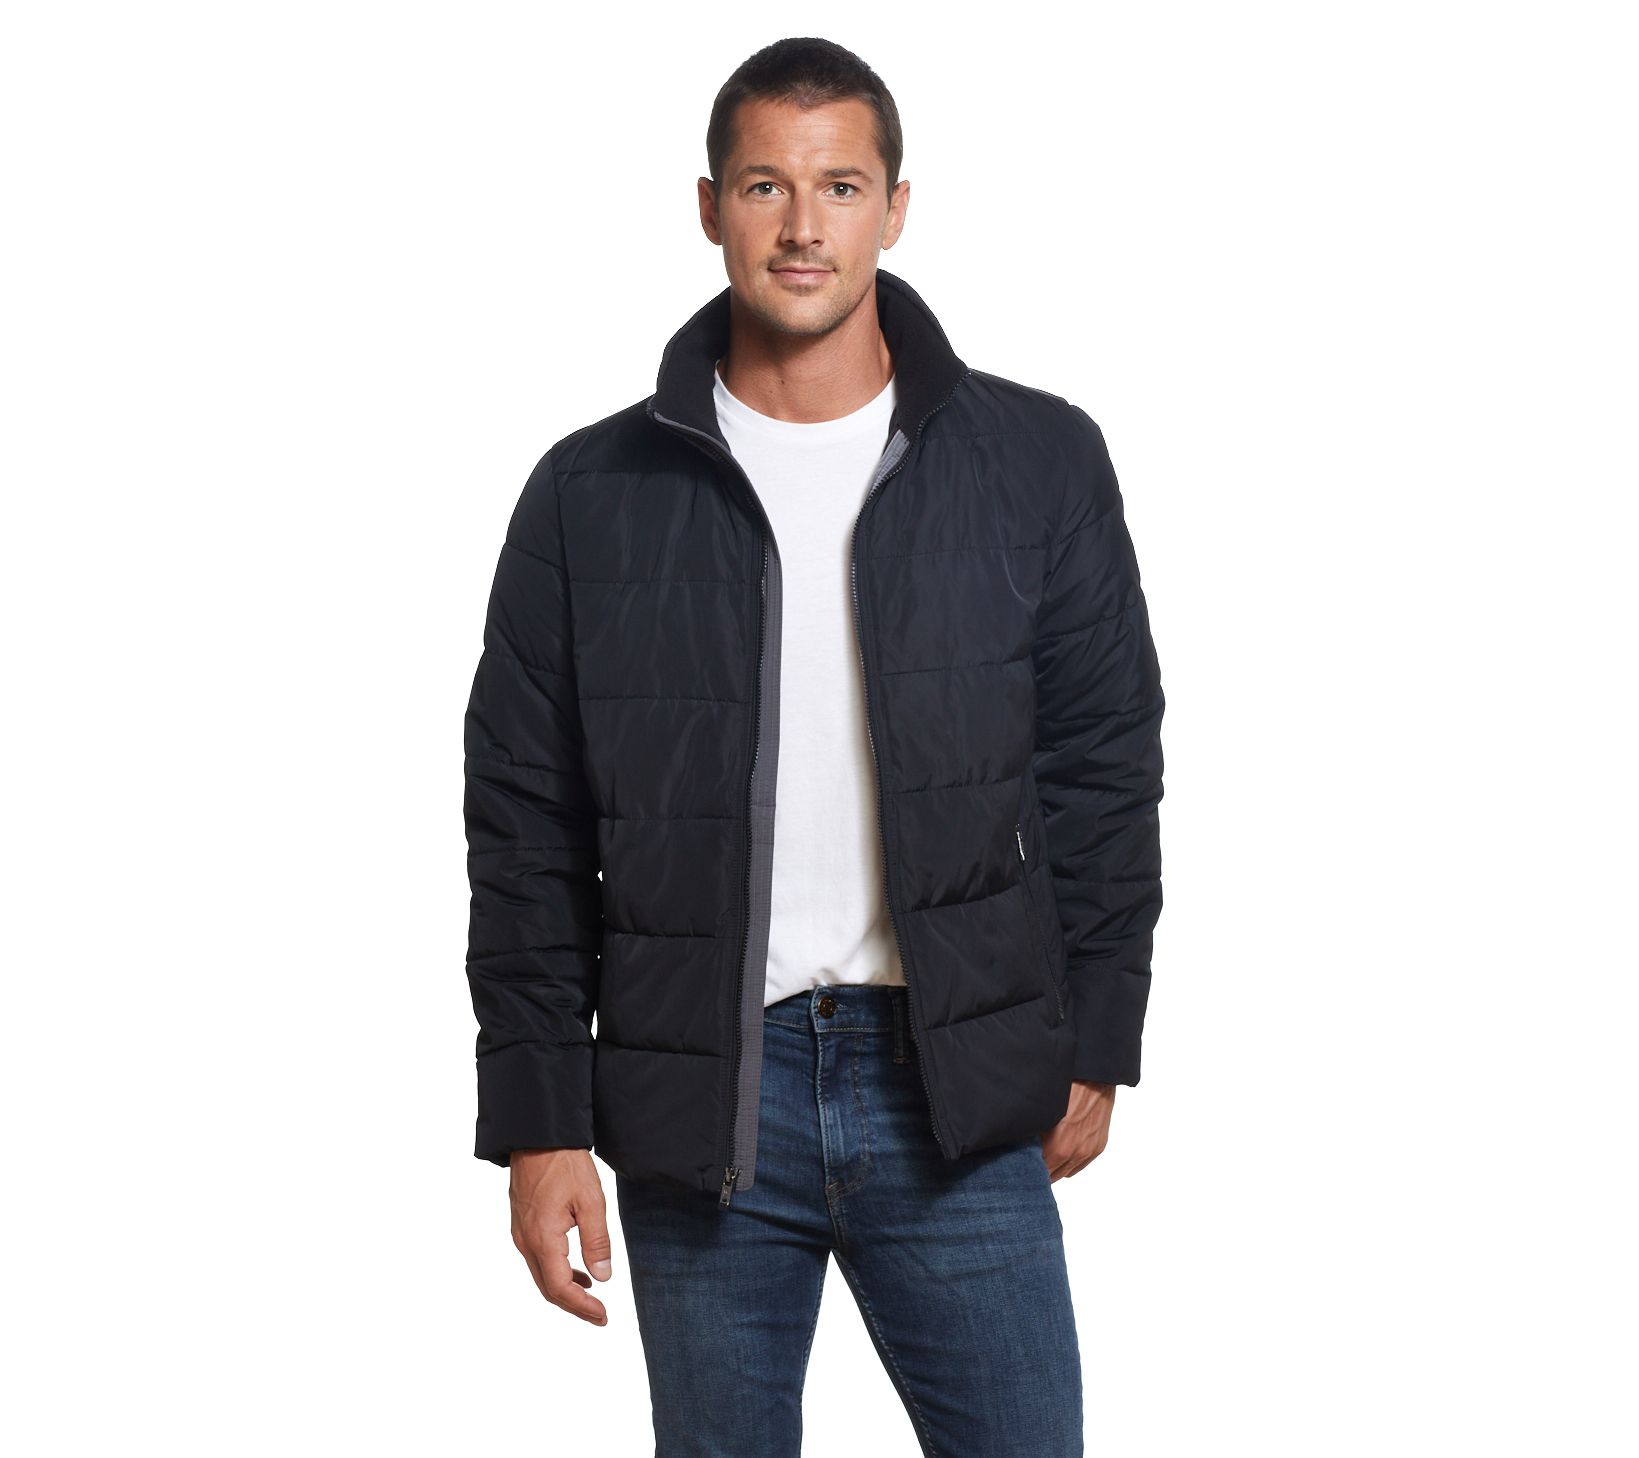 Black Hooded Puffers Winter Jackets Mens Coats Wellon Loose Fit Outer